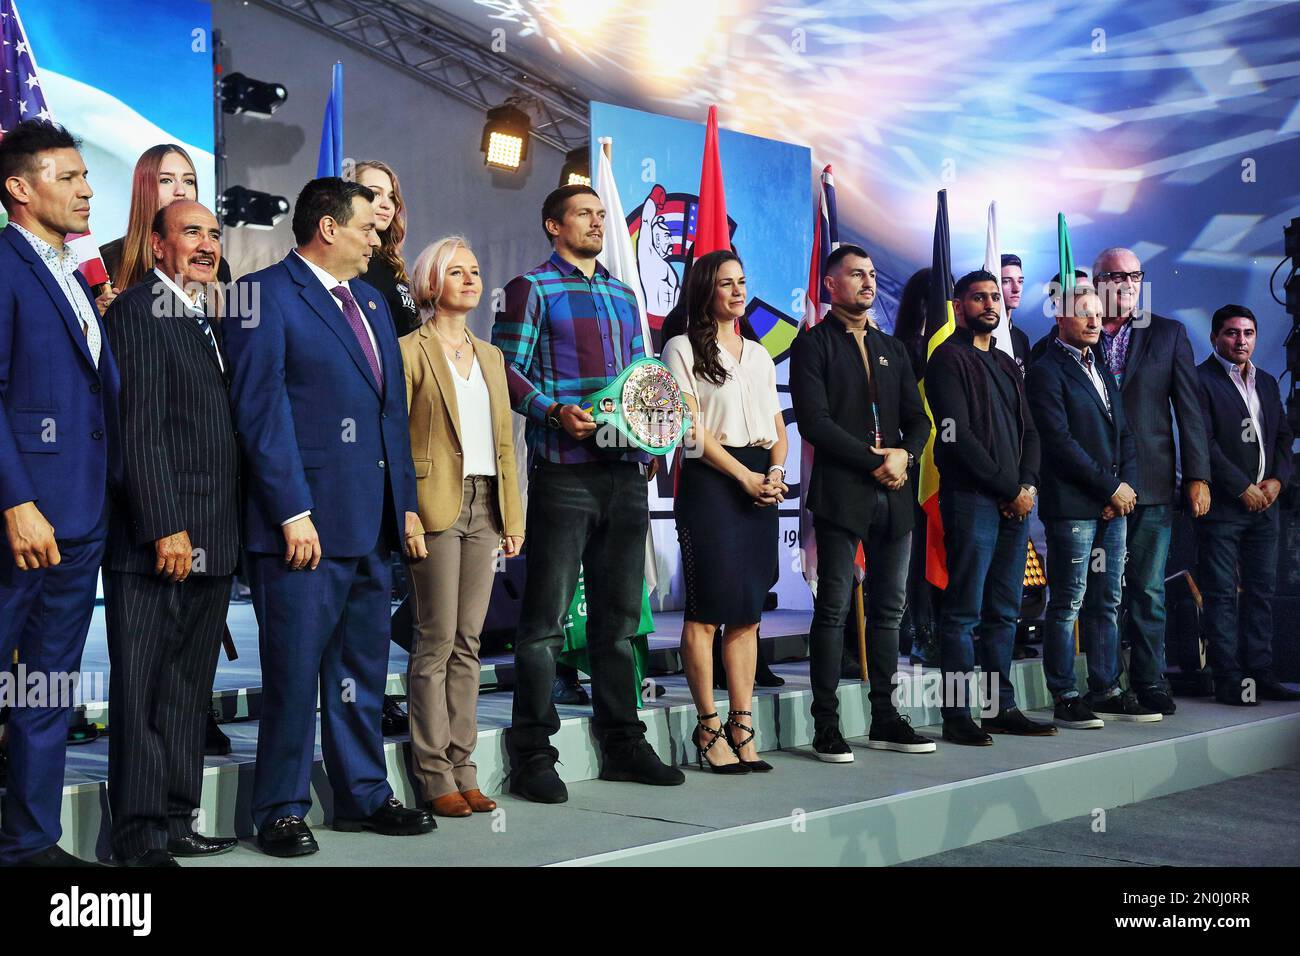 Mauricio Sulaiman (3rd from left) with reigning - Aleksander Usyk with belt, and former WBC champions at the WBC convention in Kiev Fairmont 2018 Stock Photo